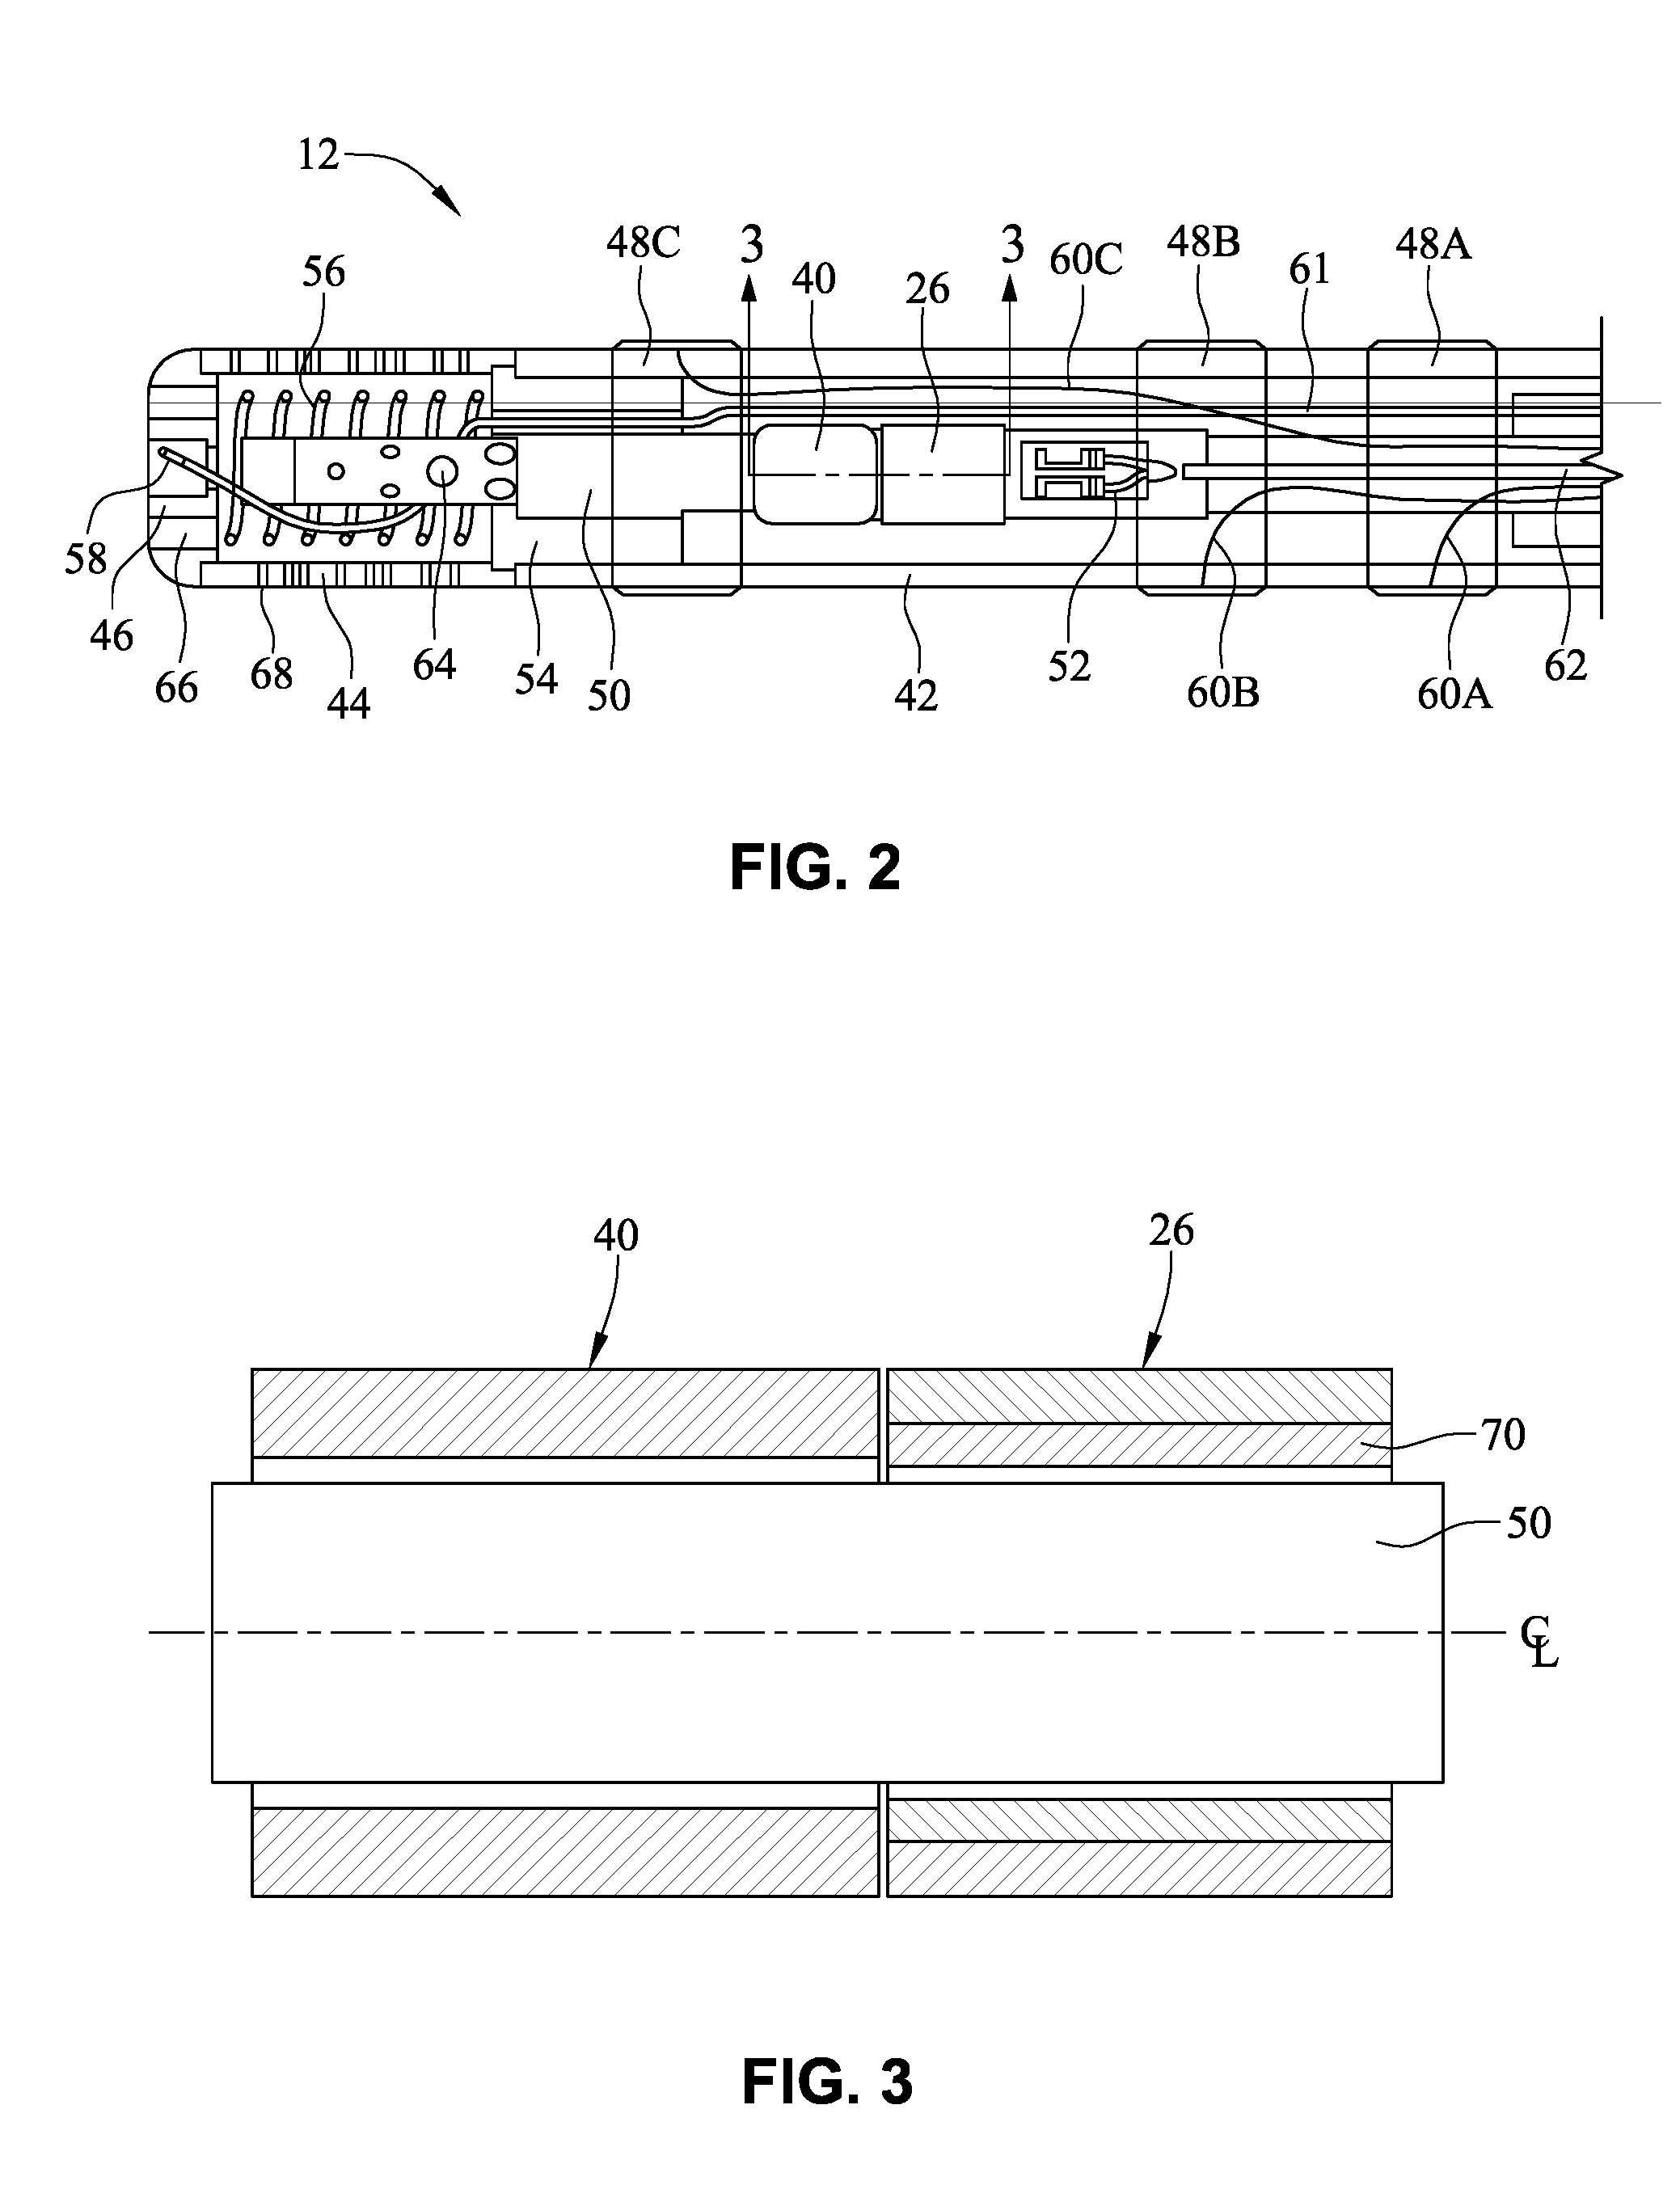 Field concentrating antennas for magnetic position sensors